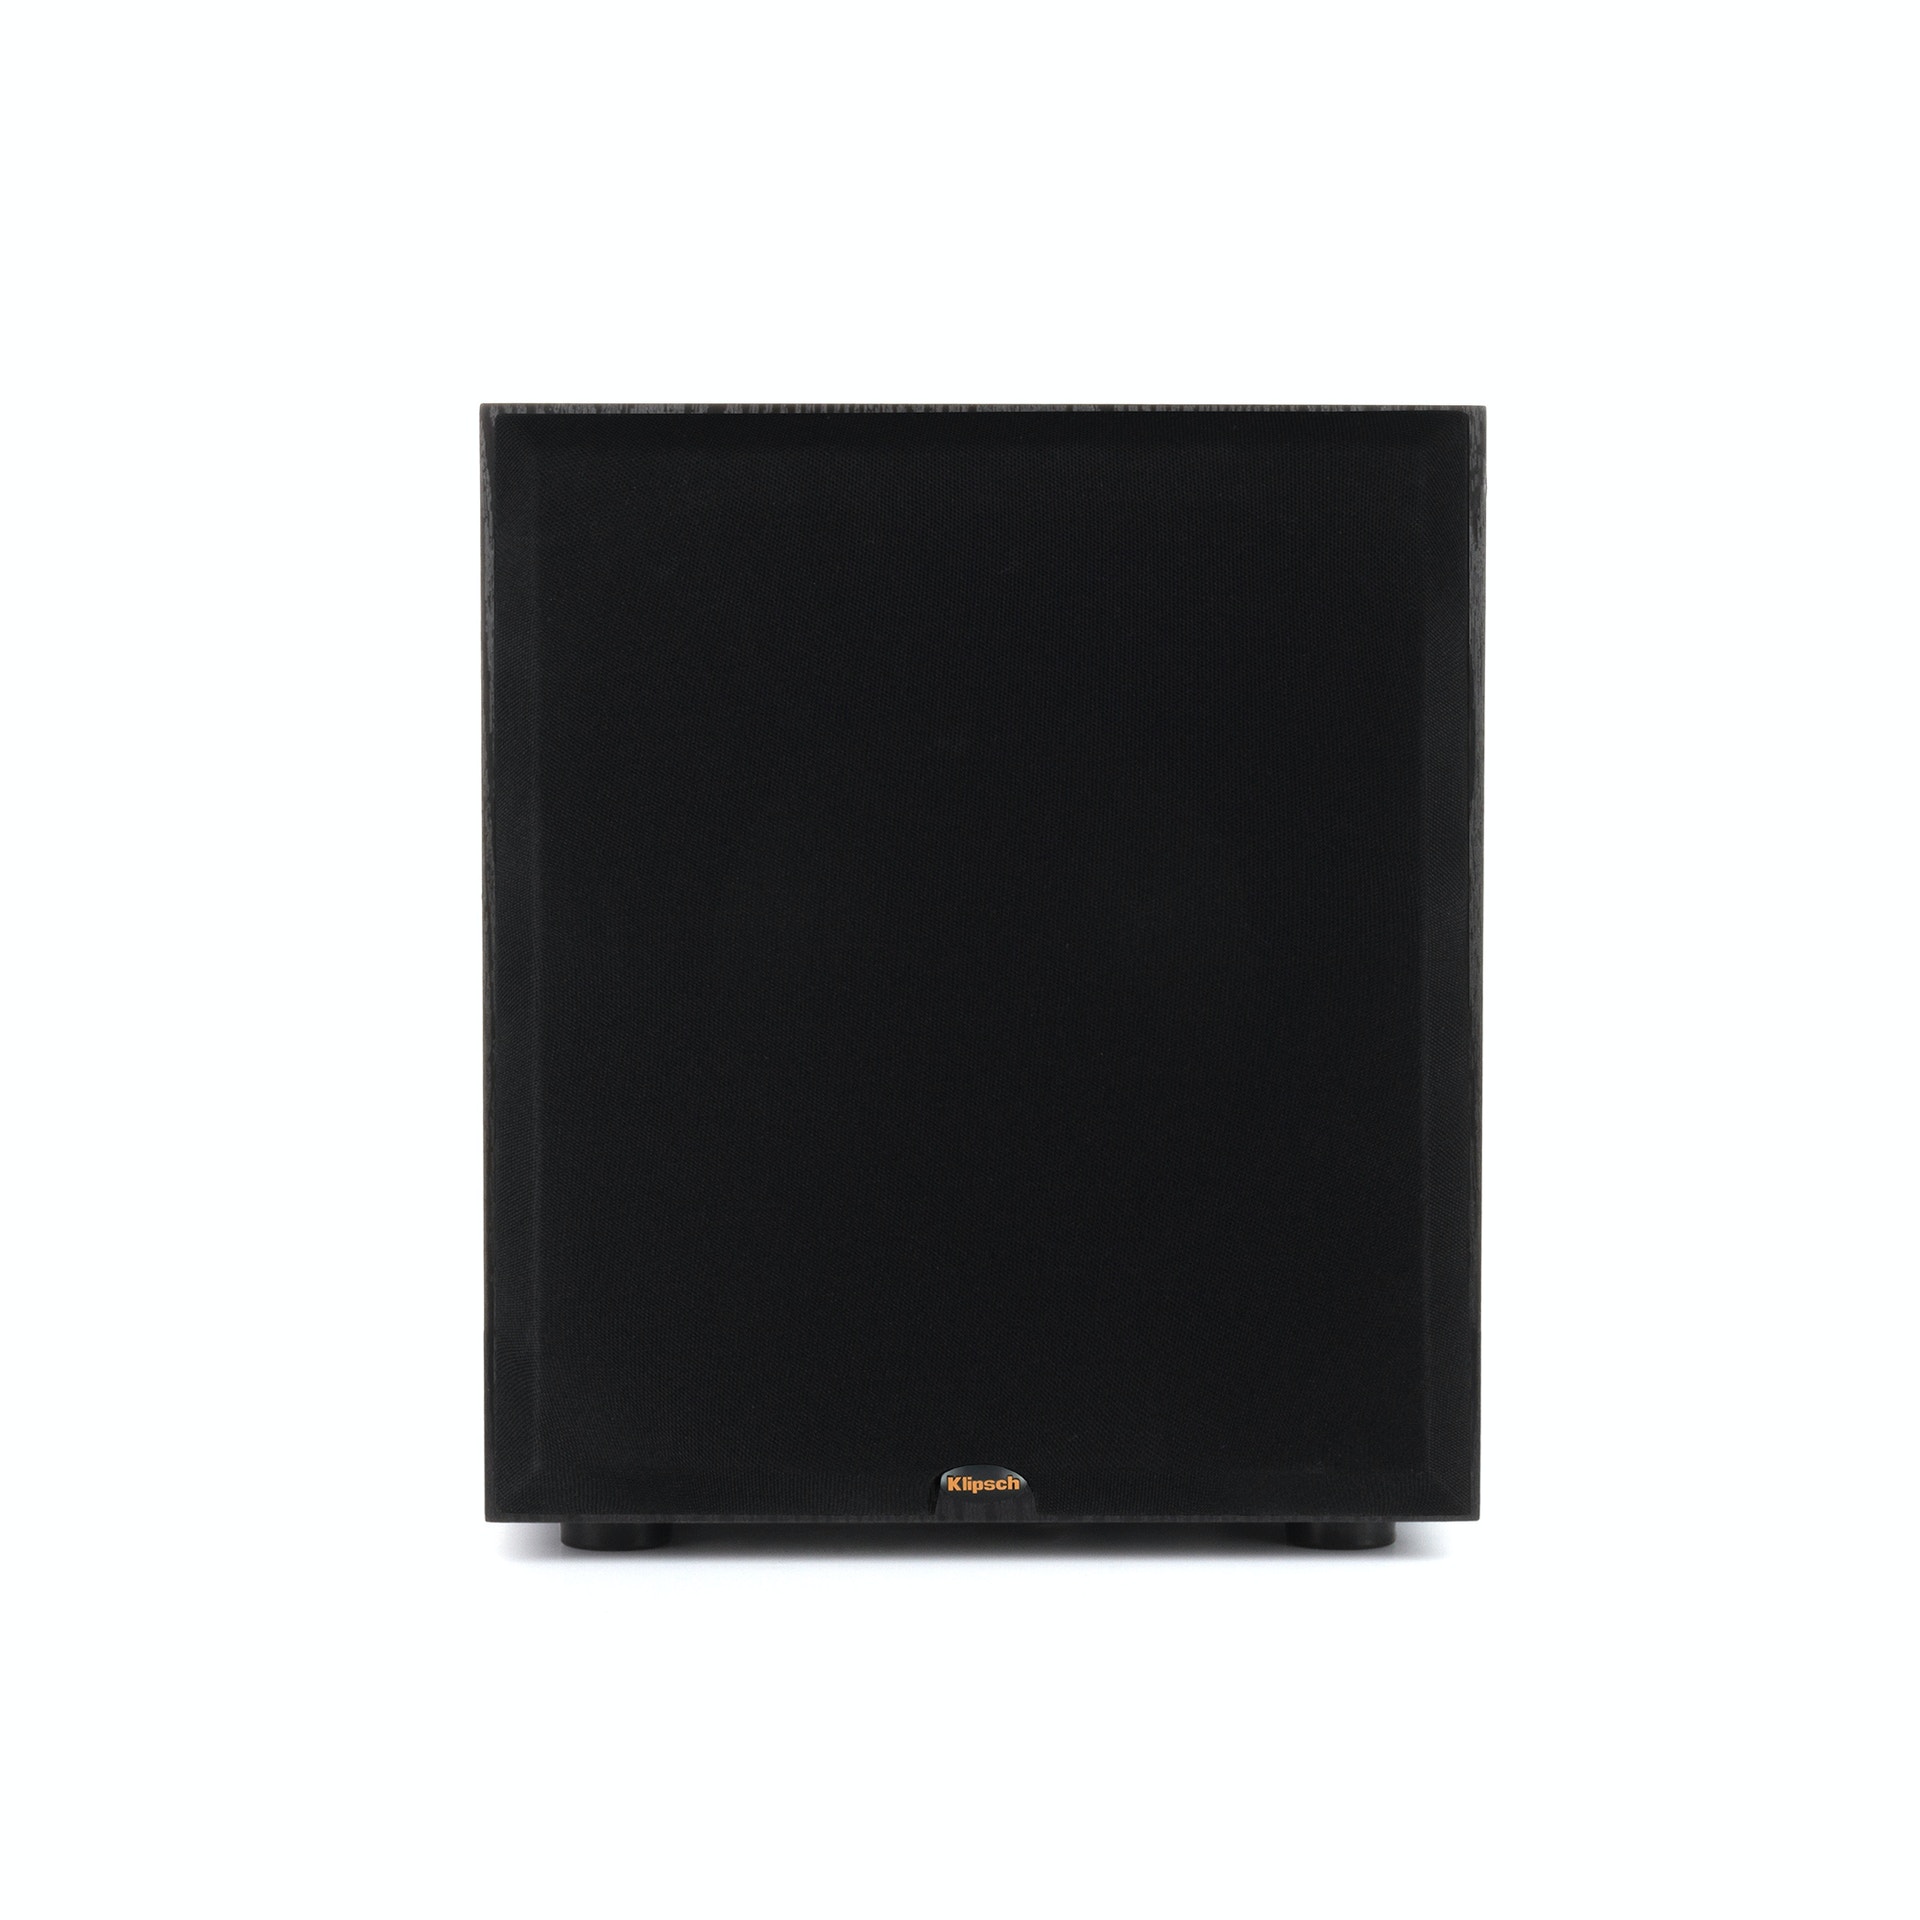 Klipsch Synergy Black Label Sub-100 - Subwoofer - 10" - black with copper accents - image 3 of 7